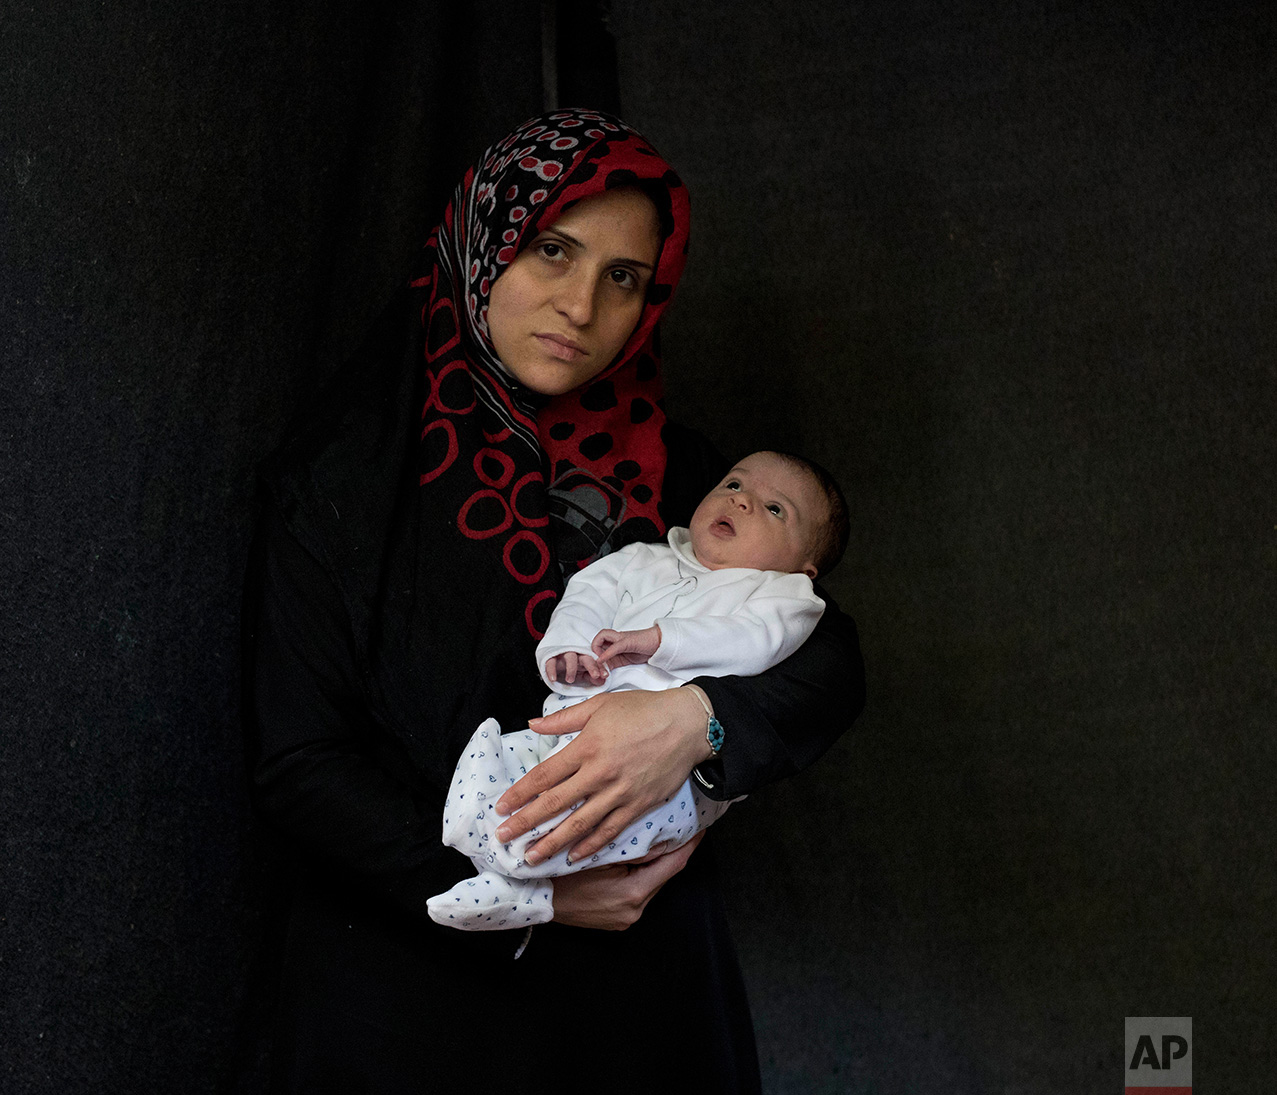  In this Saturday, Oct. 29, 2016 photo 27-year-old Nofa Bashar, a Syrian mother from Aleppo, poses with her baby girl Evelina Bashar in a tent made of blankets given by UNCHR at the Ritsona refugee camp in Greece. Nofa is one of the hundreds of refug